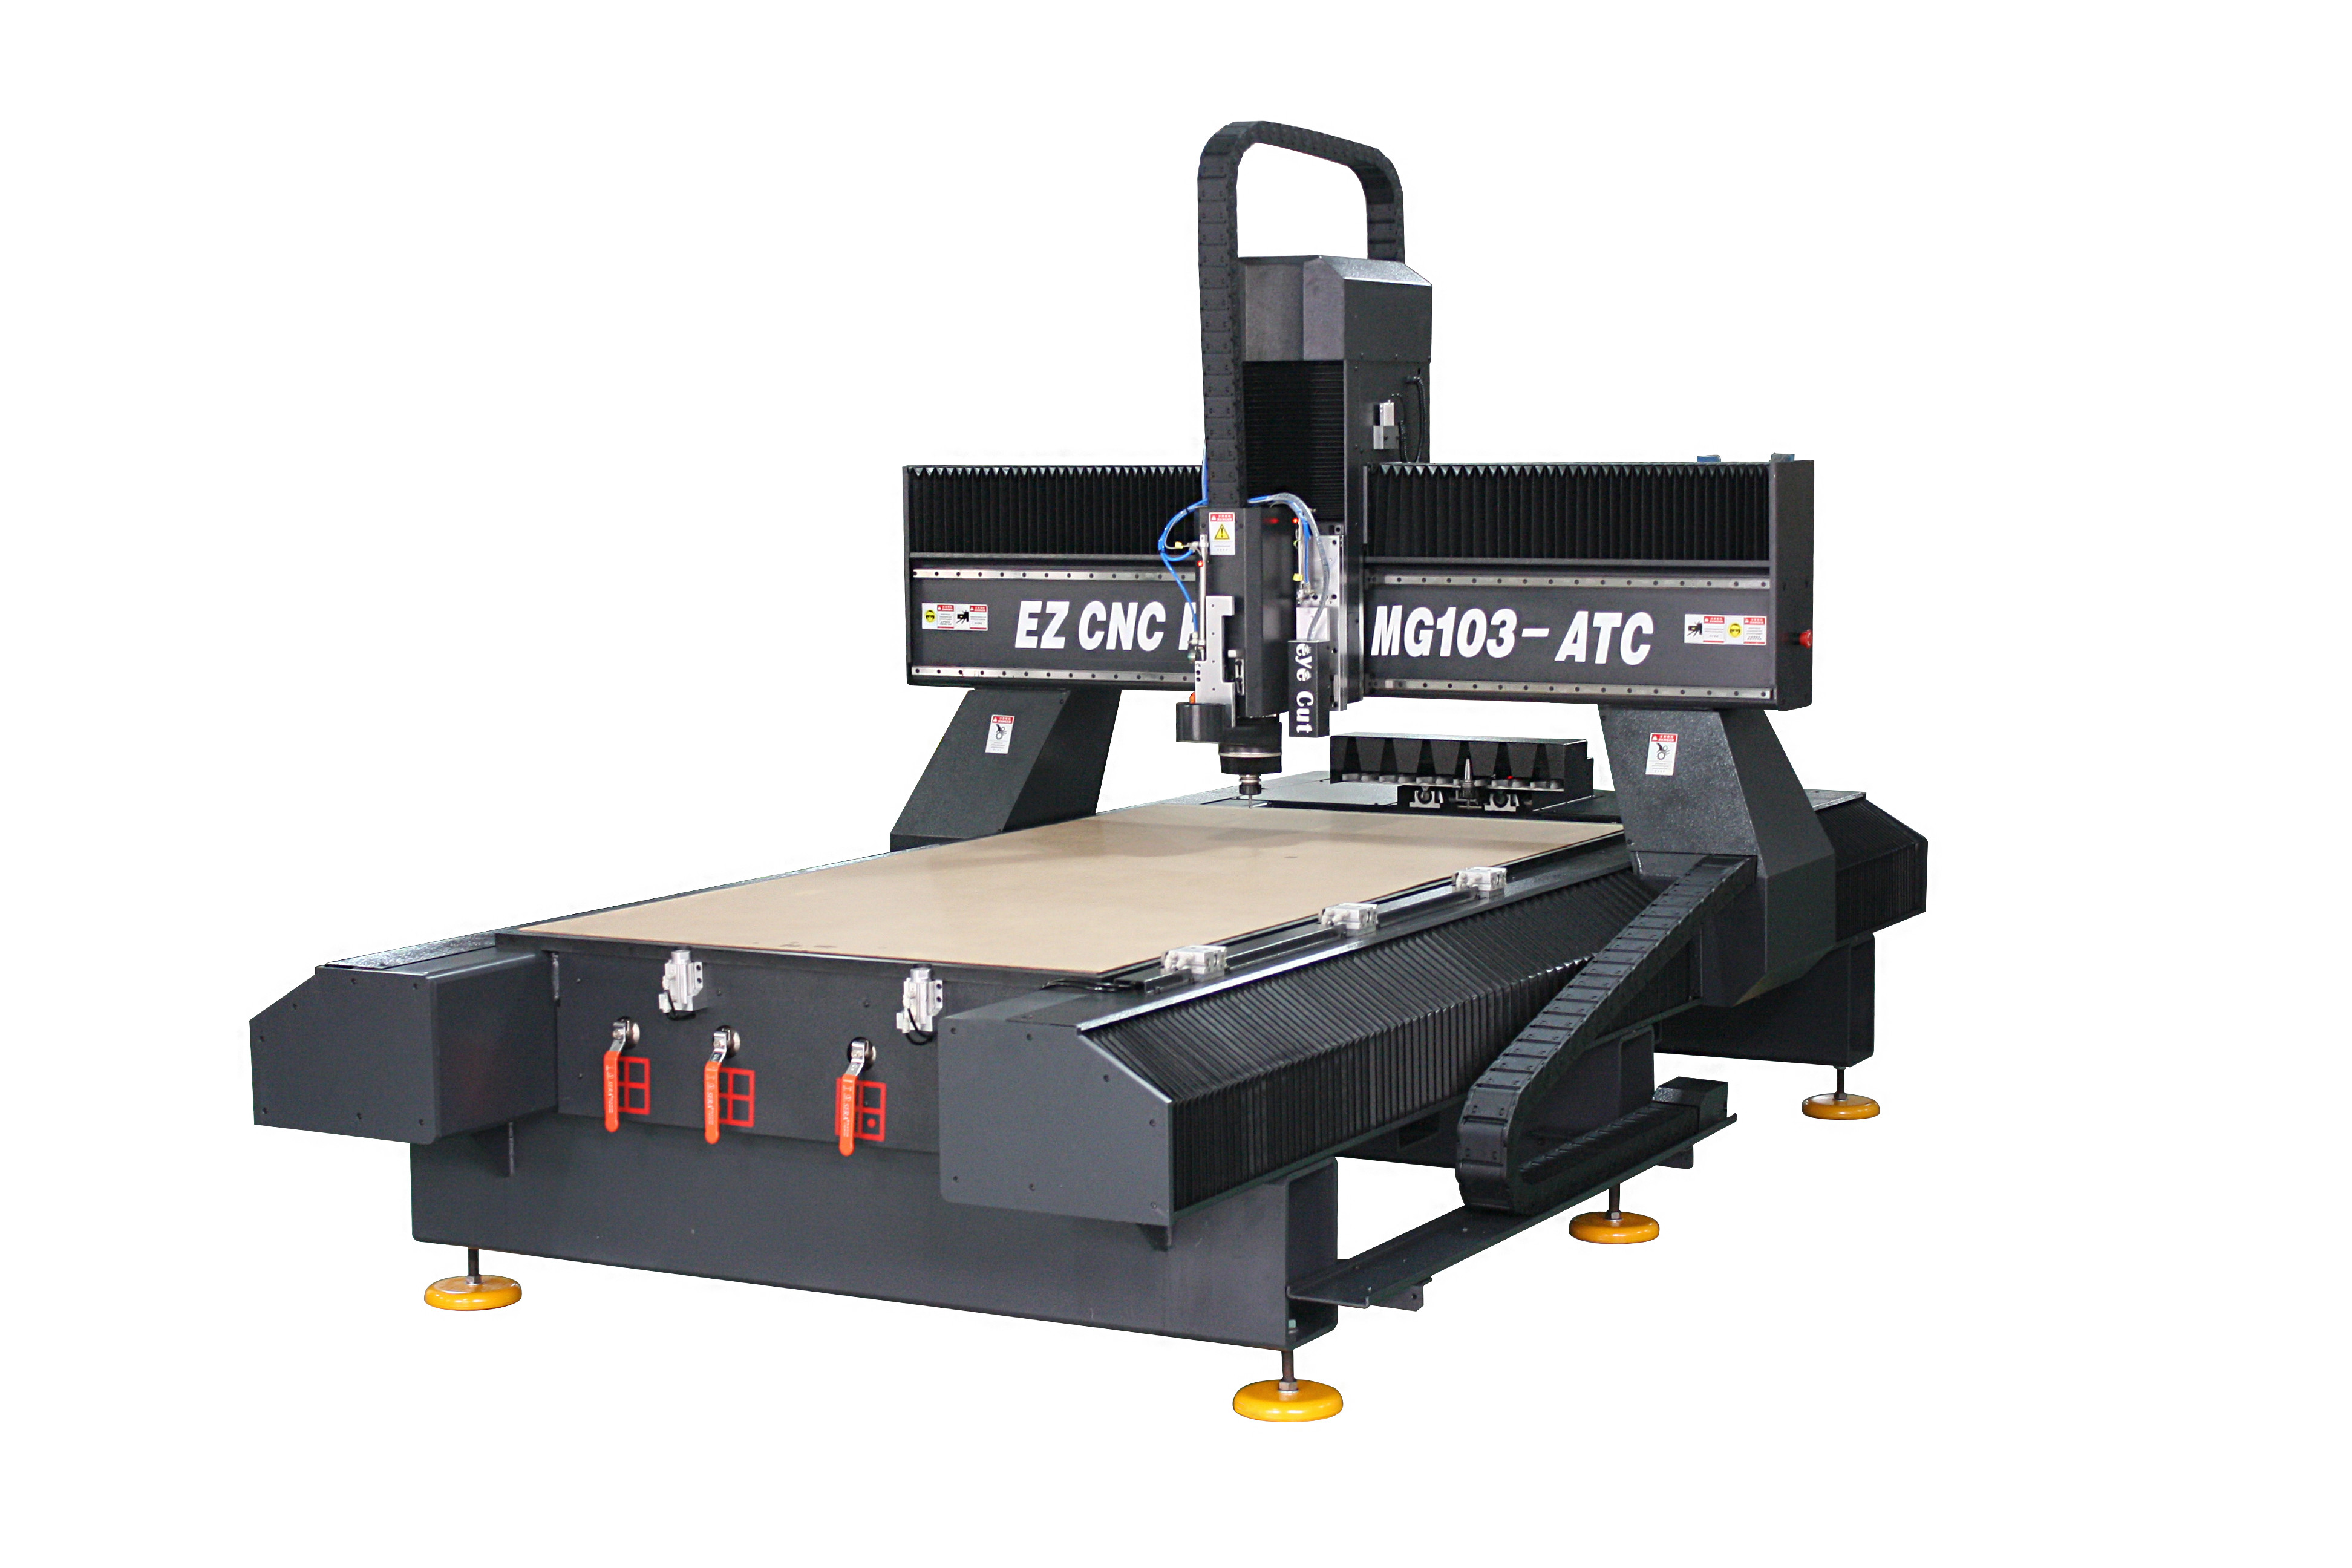  EZCNC Routers-MG 1325/Wood, Acrylic, Alu. 3D Surface; SolidSurface cutting, engraving and marking system Manufactures